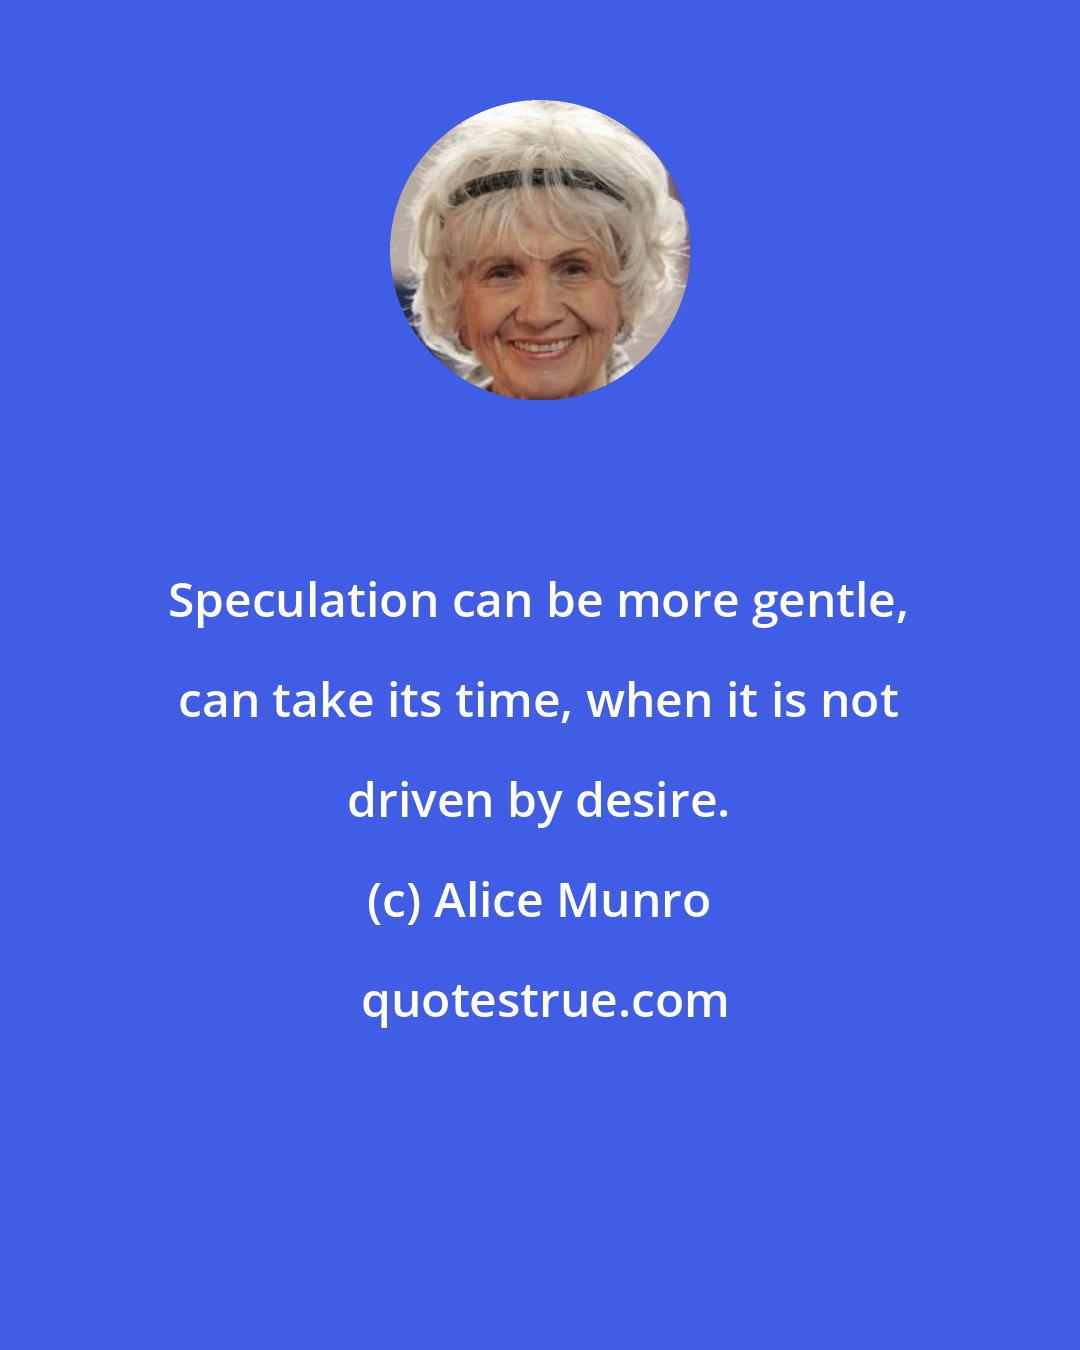 Alice Munro: Speculation can be more gentle, can take its time, when it is not driven by desire.